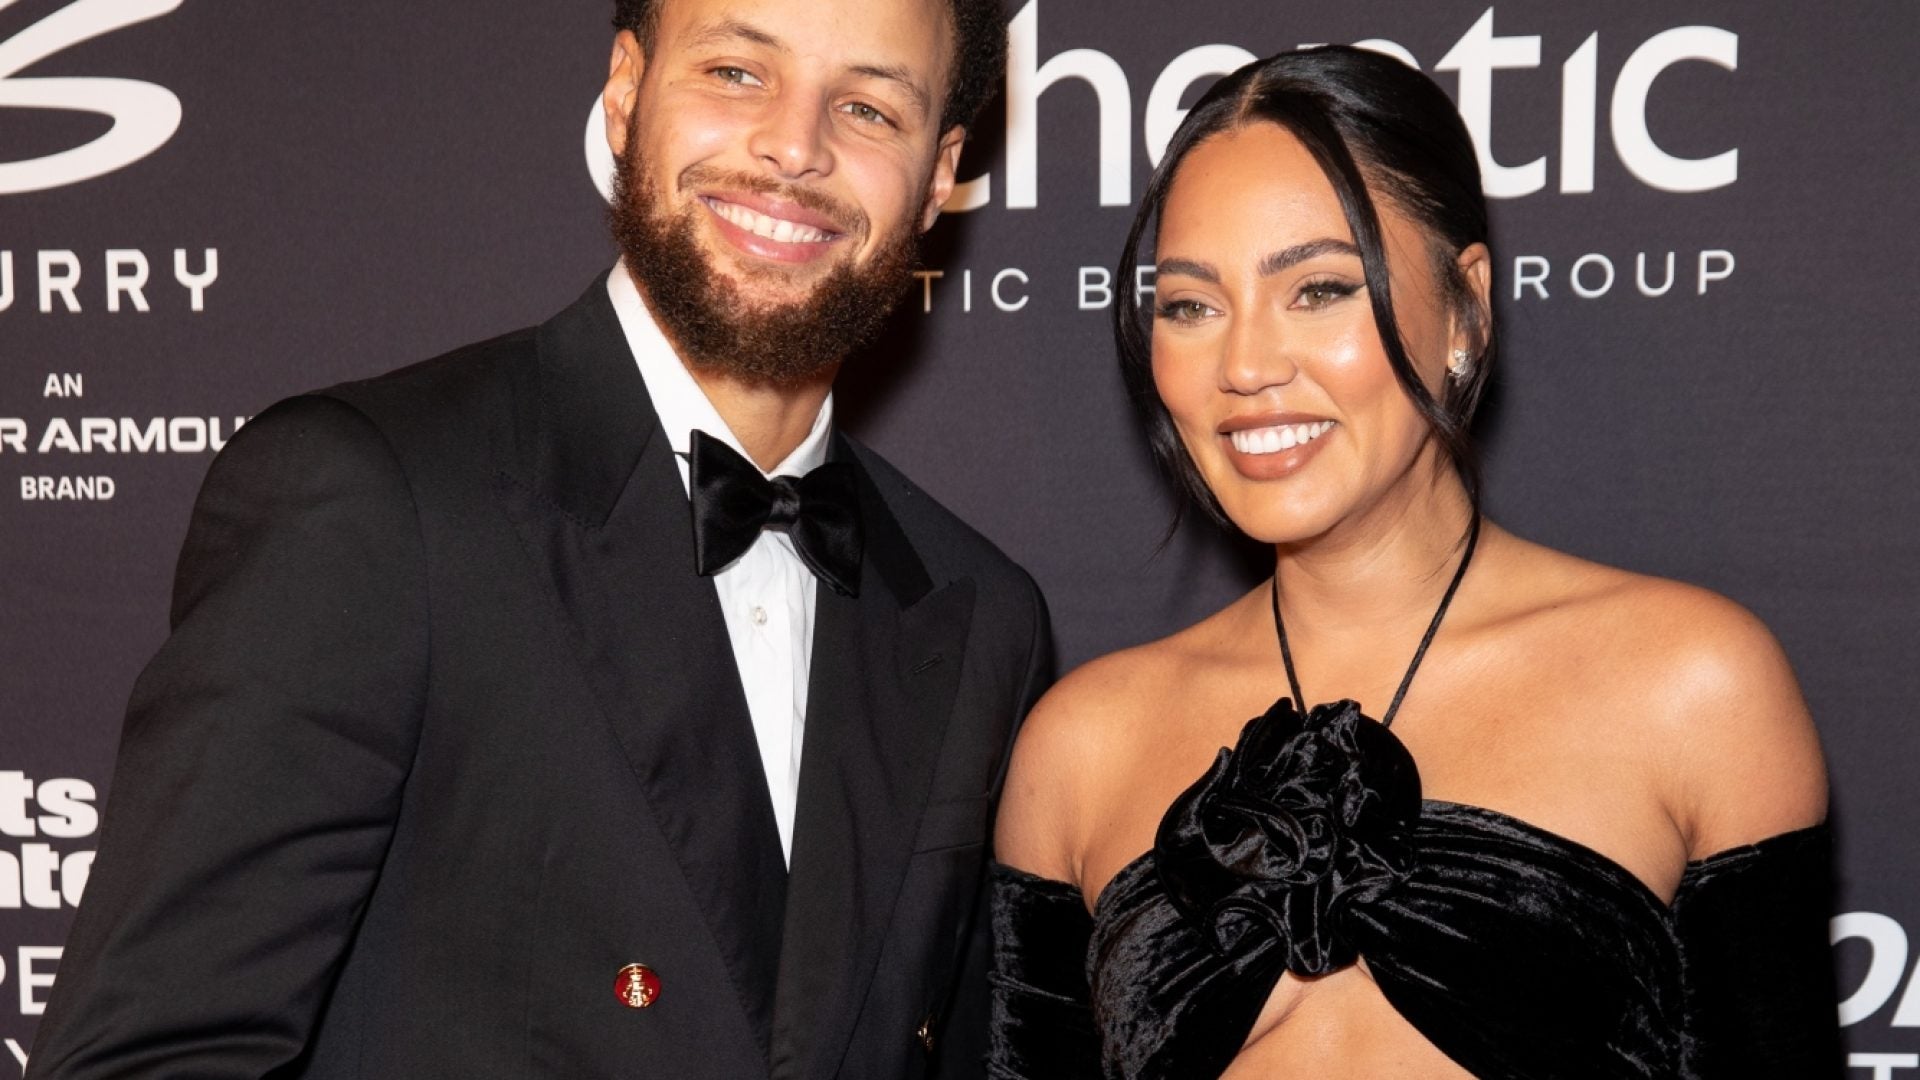 Ayesha Curry Is Pregnant With Baby No. 4!